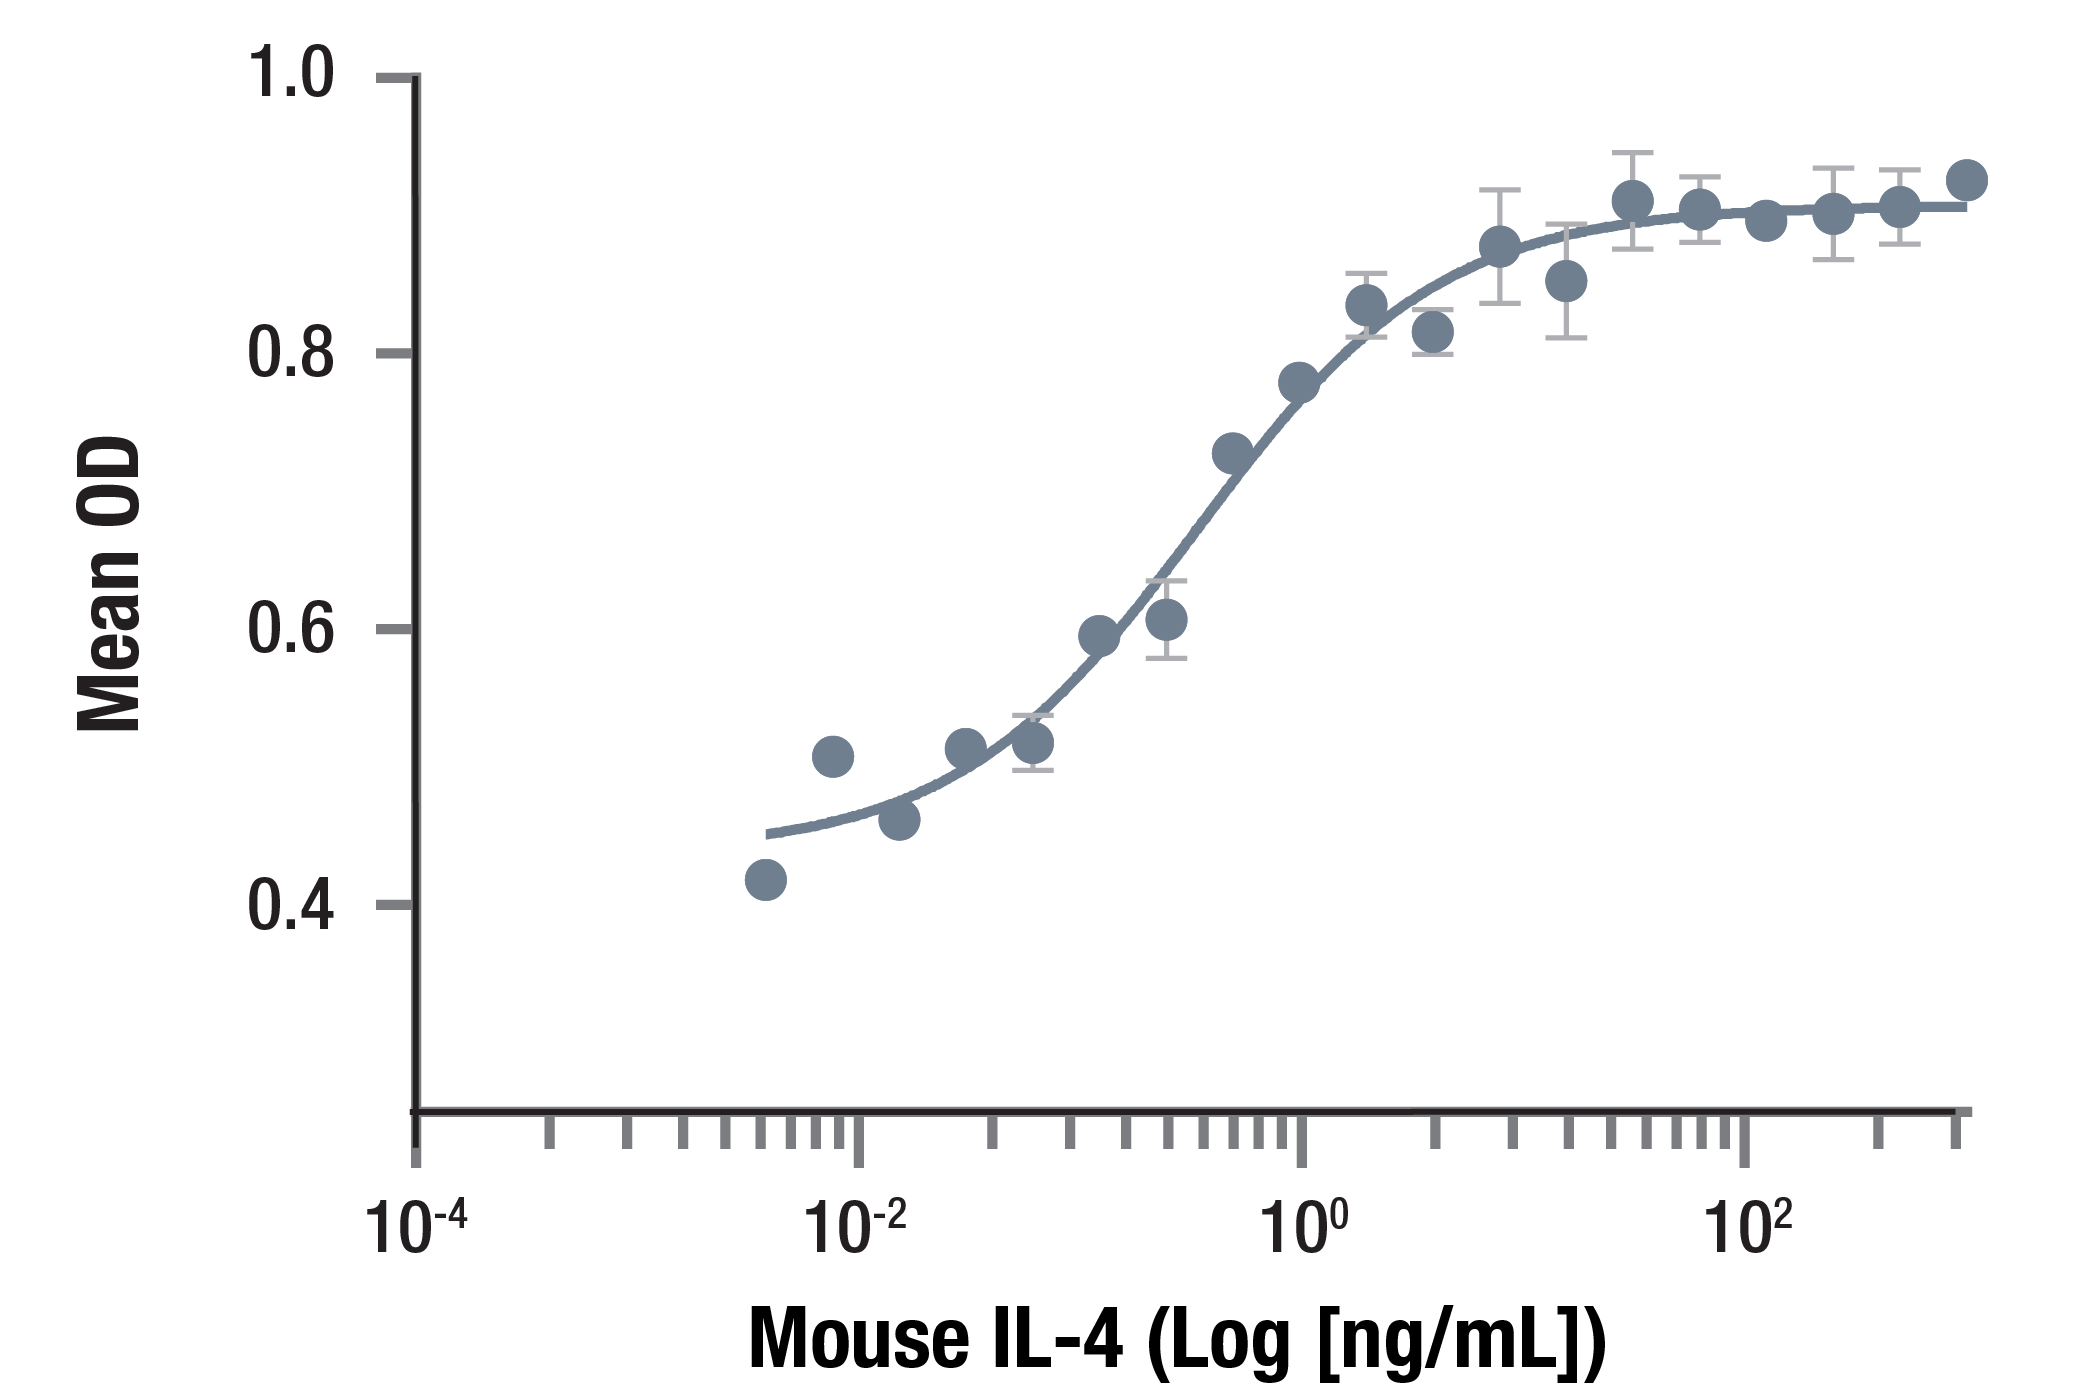  Image 1: Mouse IL-4 Recombinant Protein